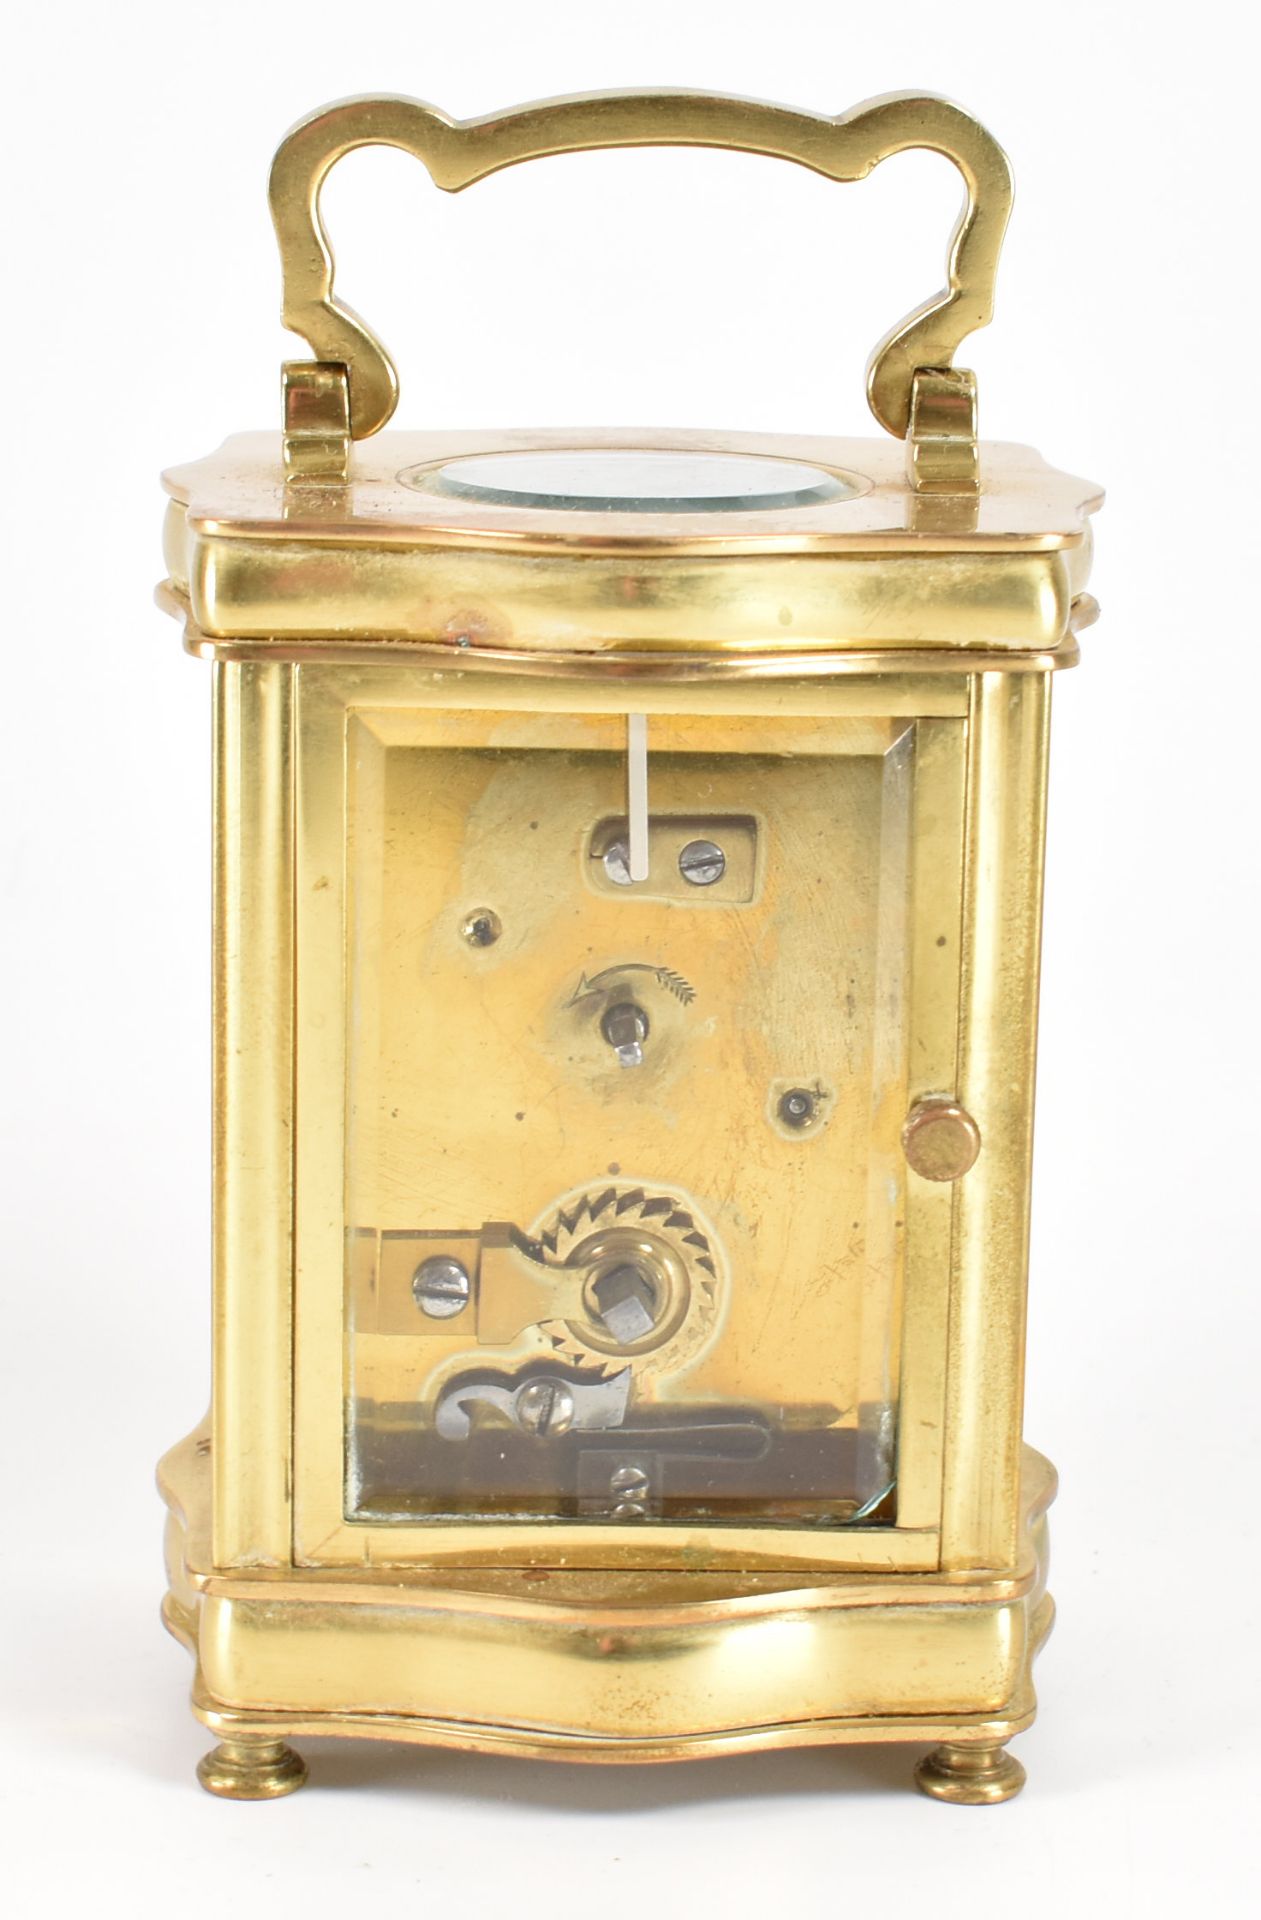 20TH CENTURY BRASS CARRIAGE CLOCK - Image 4 of 5